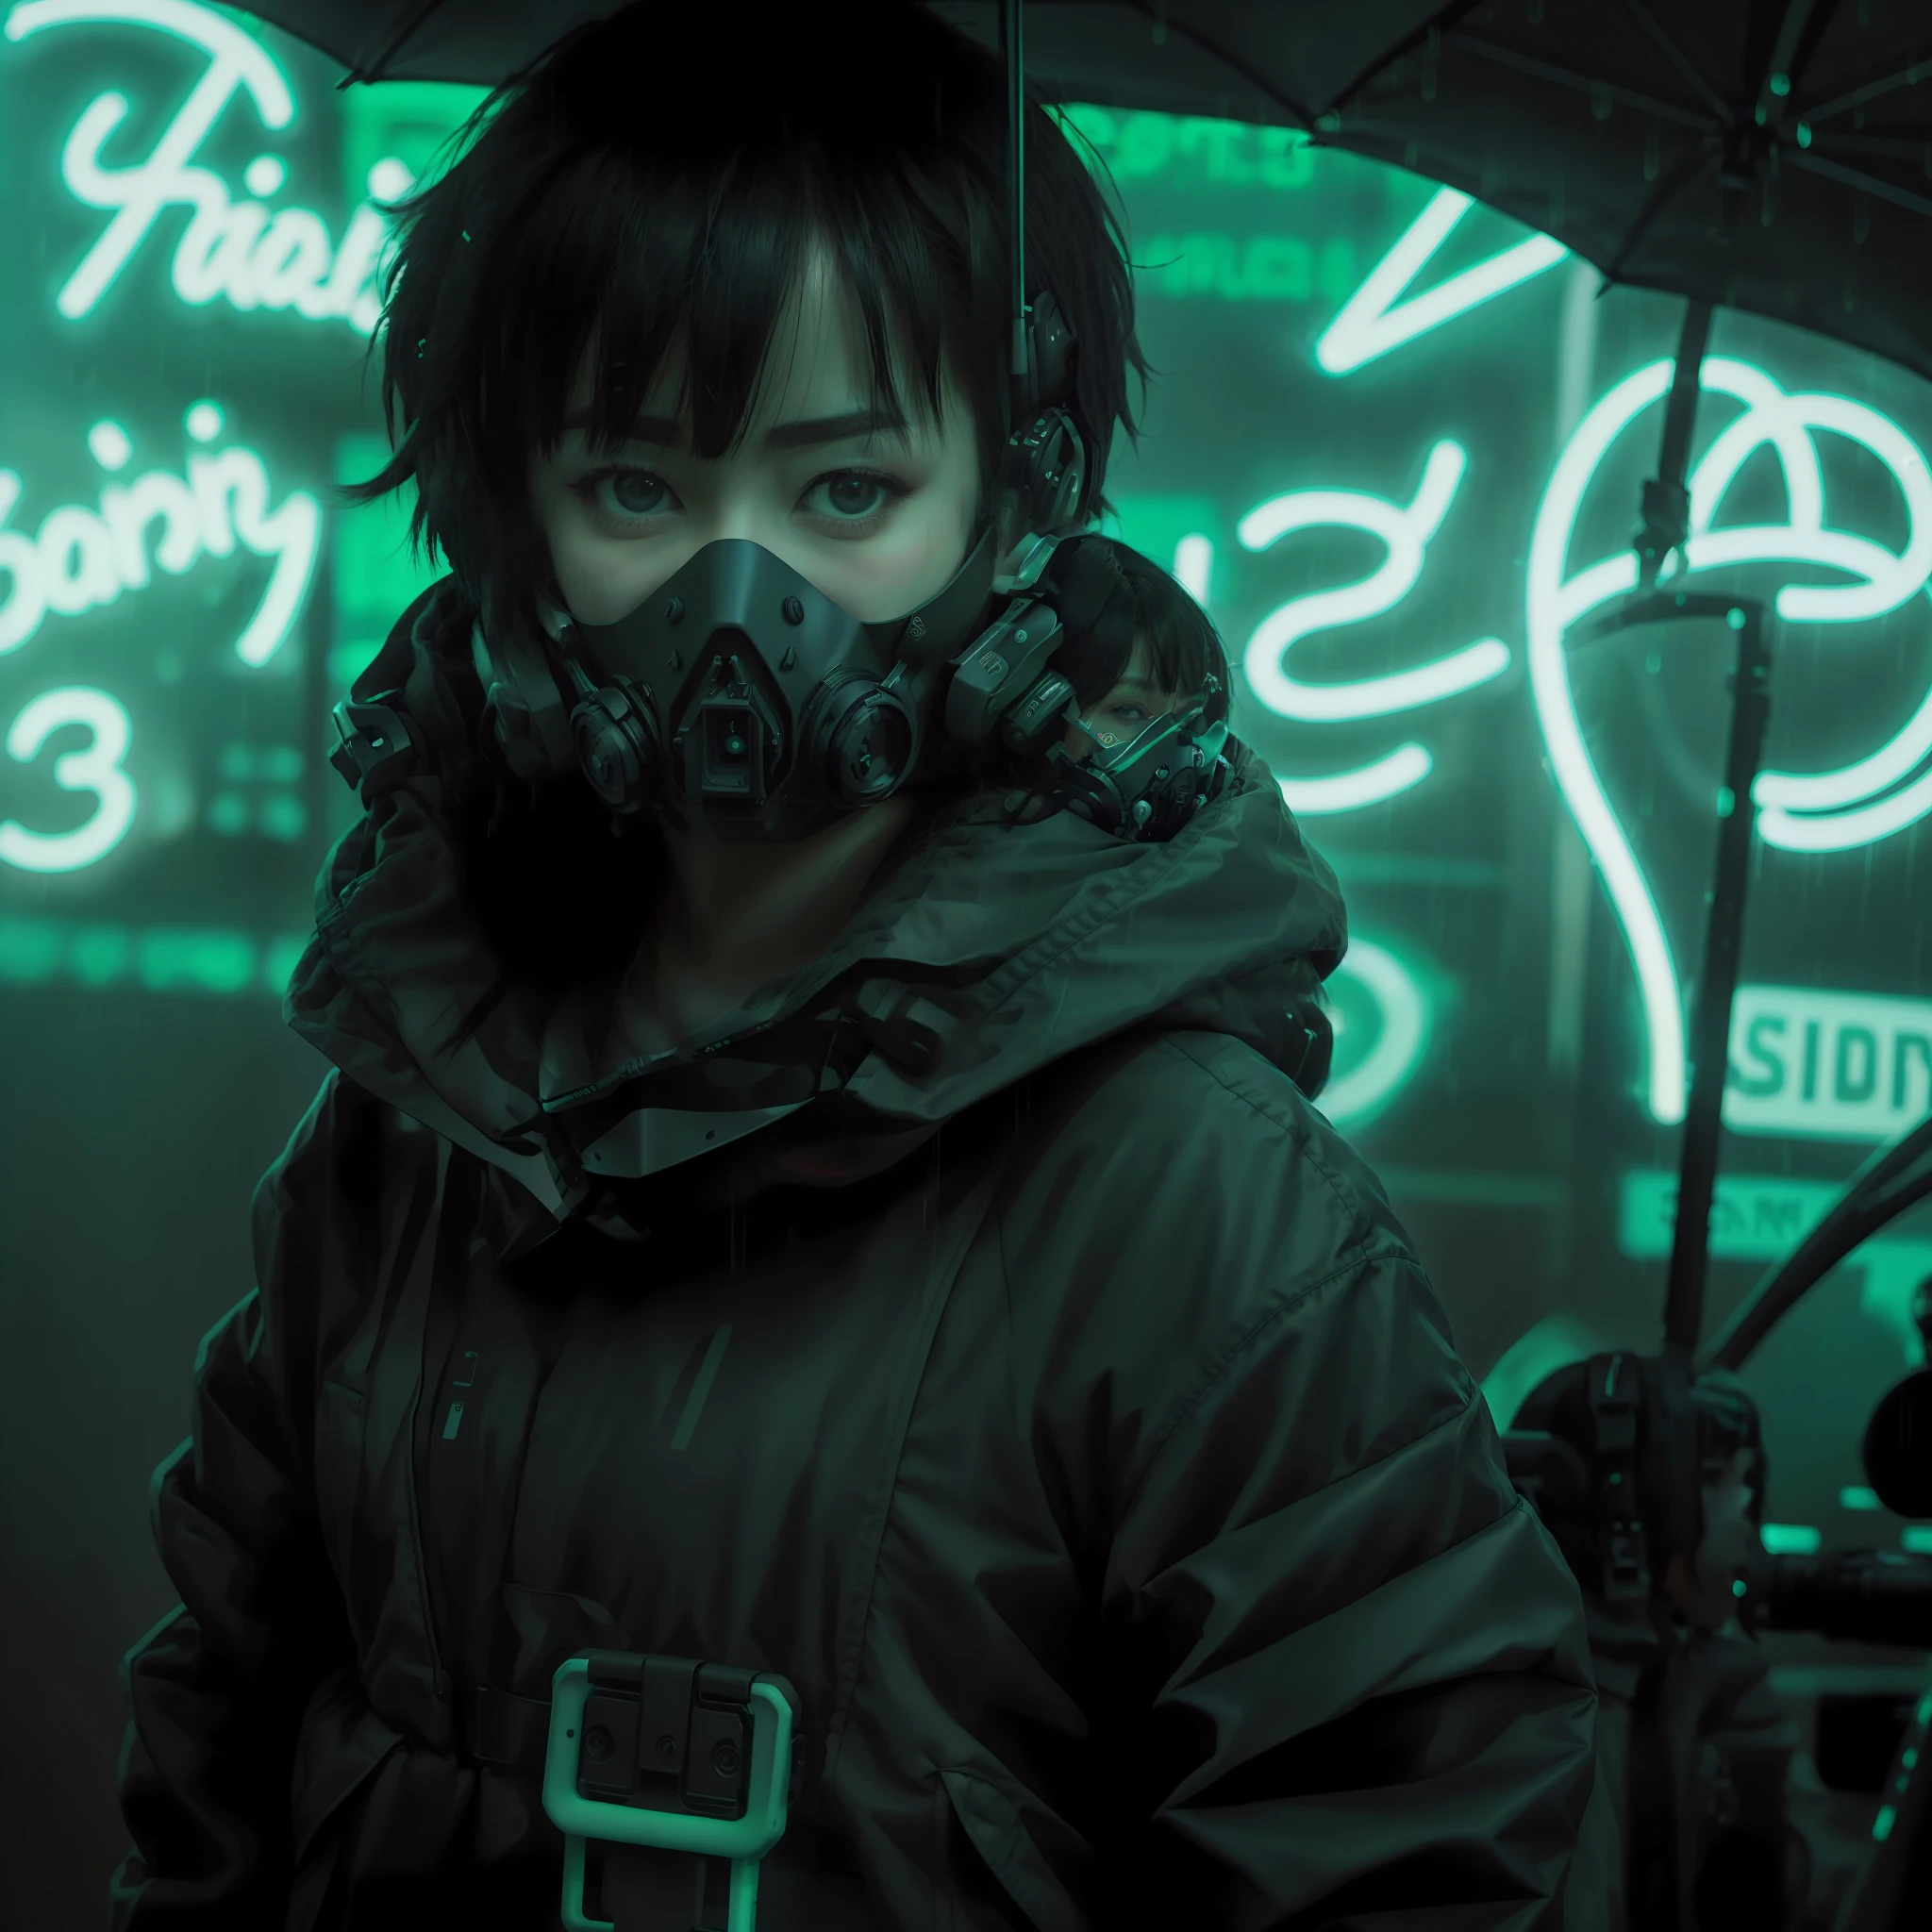 Photo DSLR, a woman with short black hair standing in front of a green neon sign, tech mask, jacket, in the rain, NeonNoir, hard shadow, masterpiece, best quality, Intricate, High Detail, 8k, modelshoot style, film grain